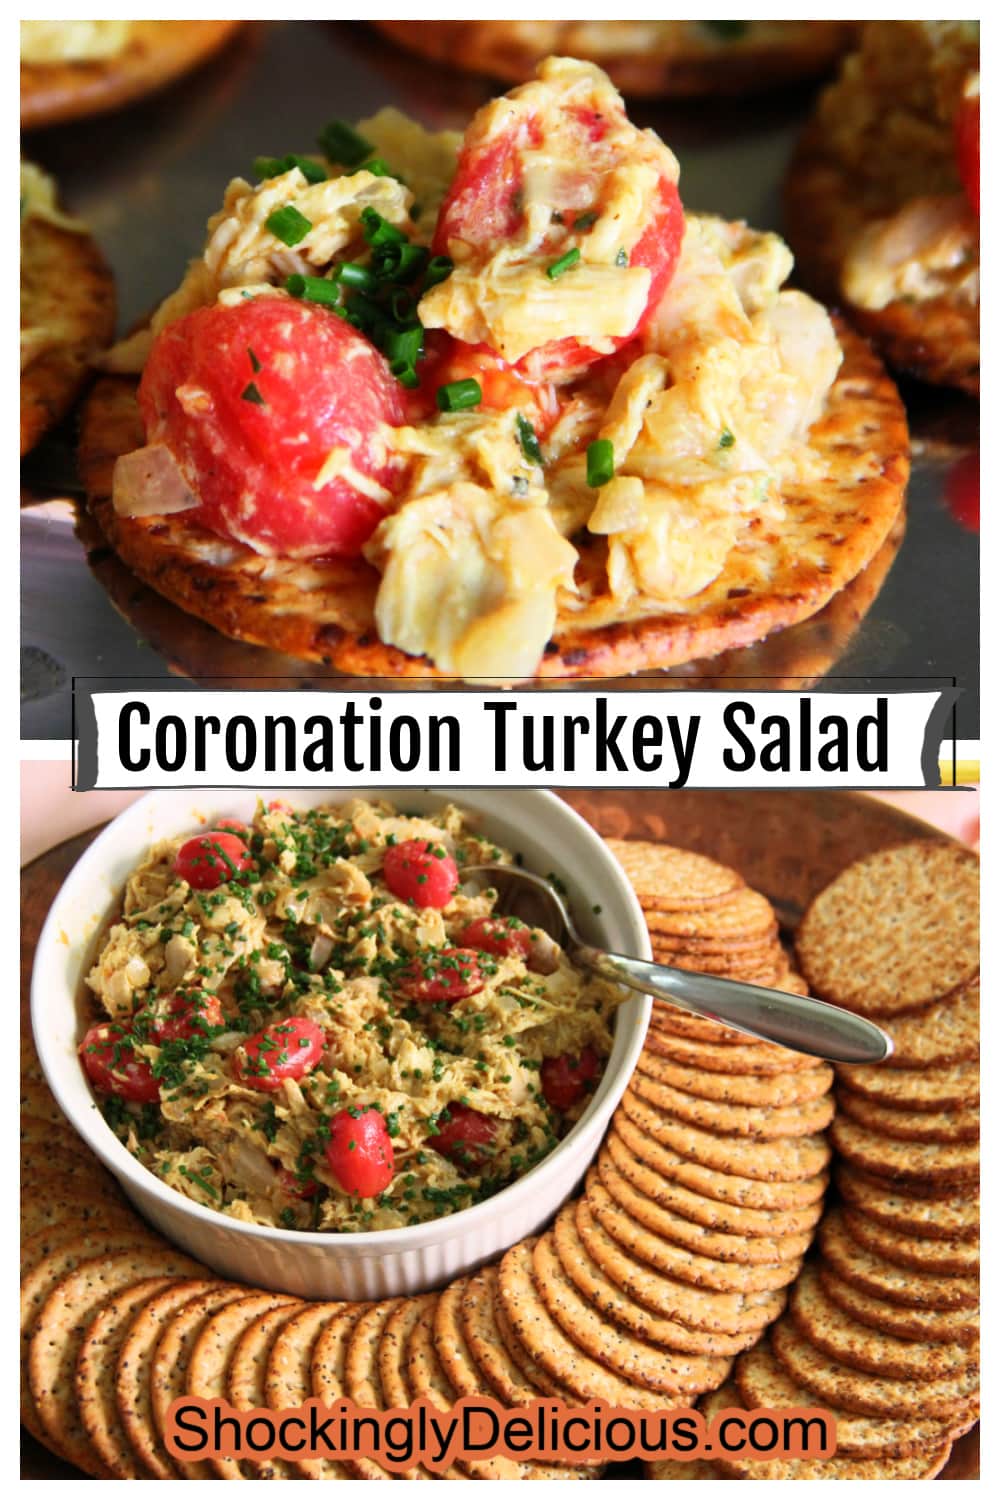 Pinterest Pin on Coronation Turkey Salad showing a closeup of the salad on a cracker and the dip surrounded by crackers